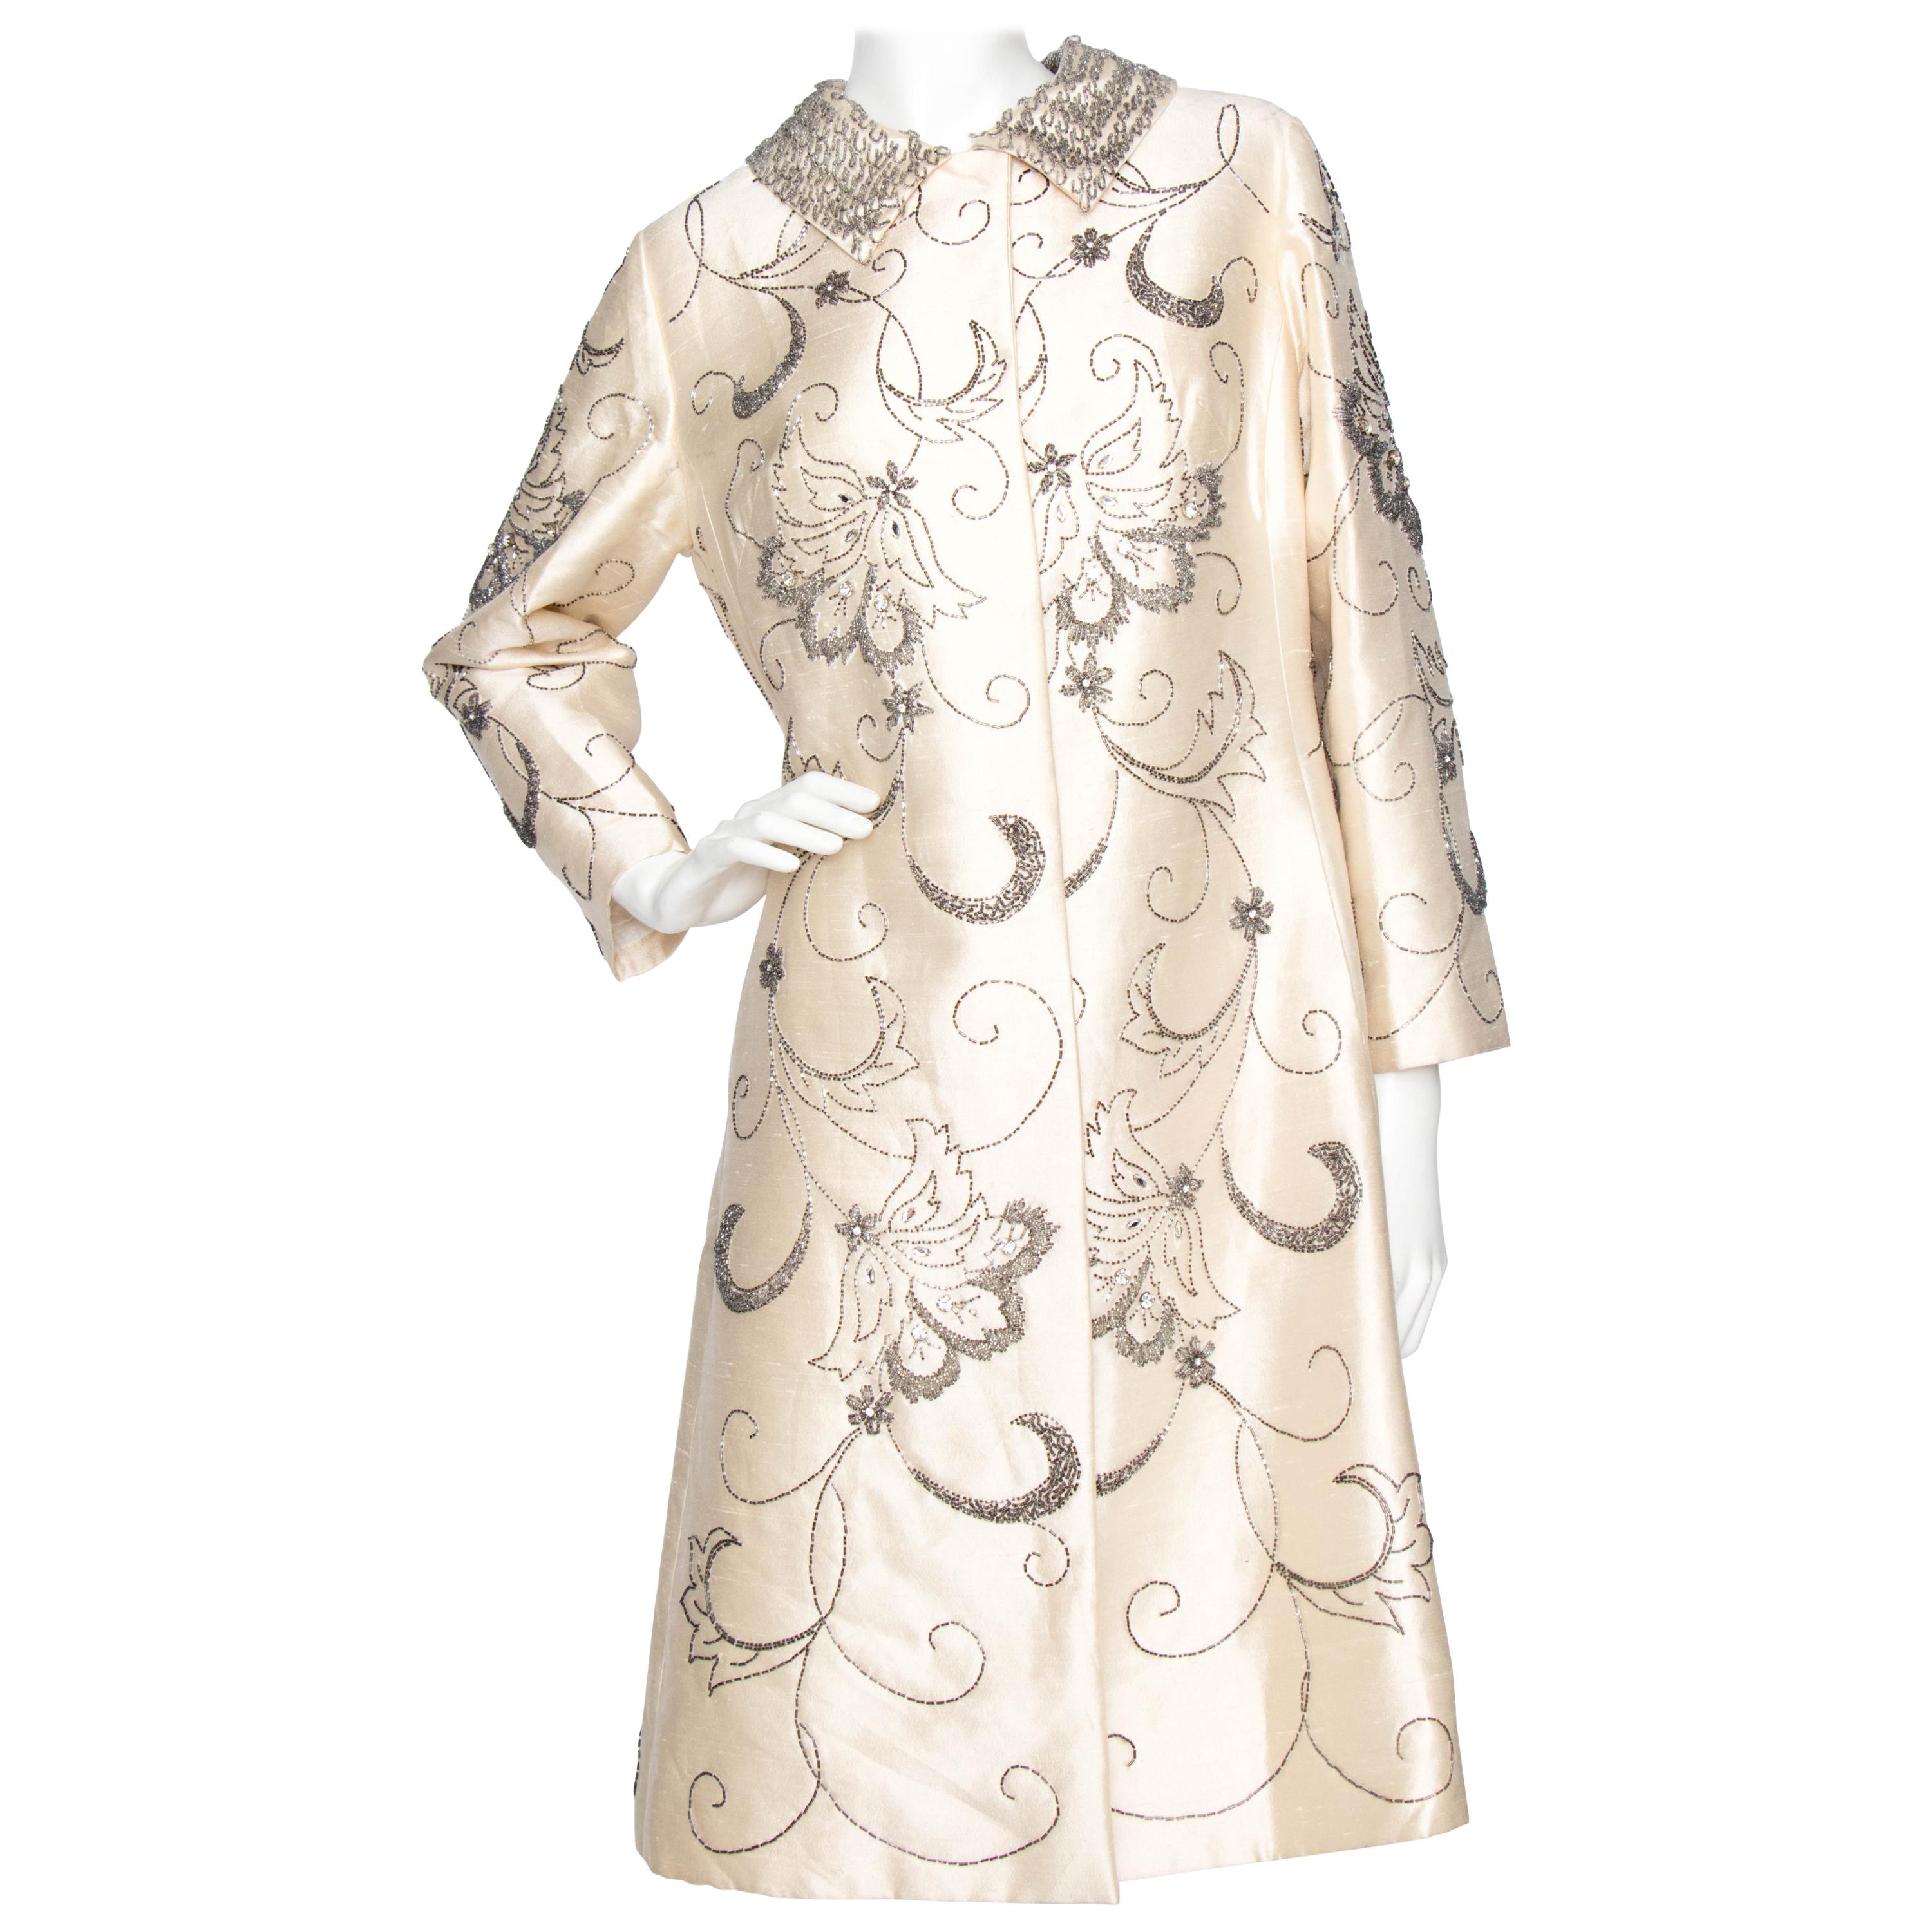 A 1960s Ivory Silk Couture Coat With Beads and Embellishment